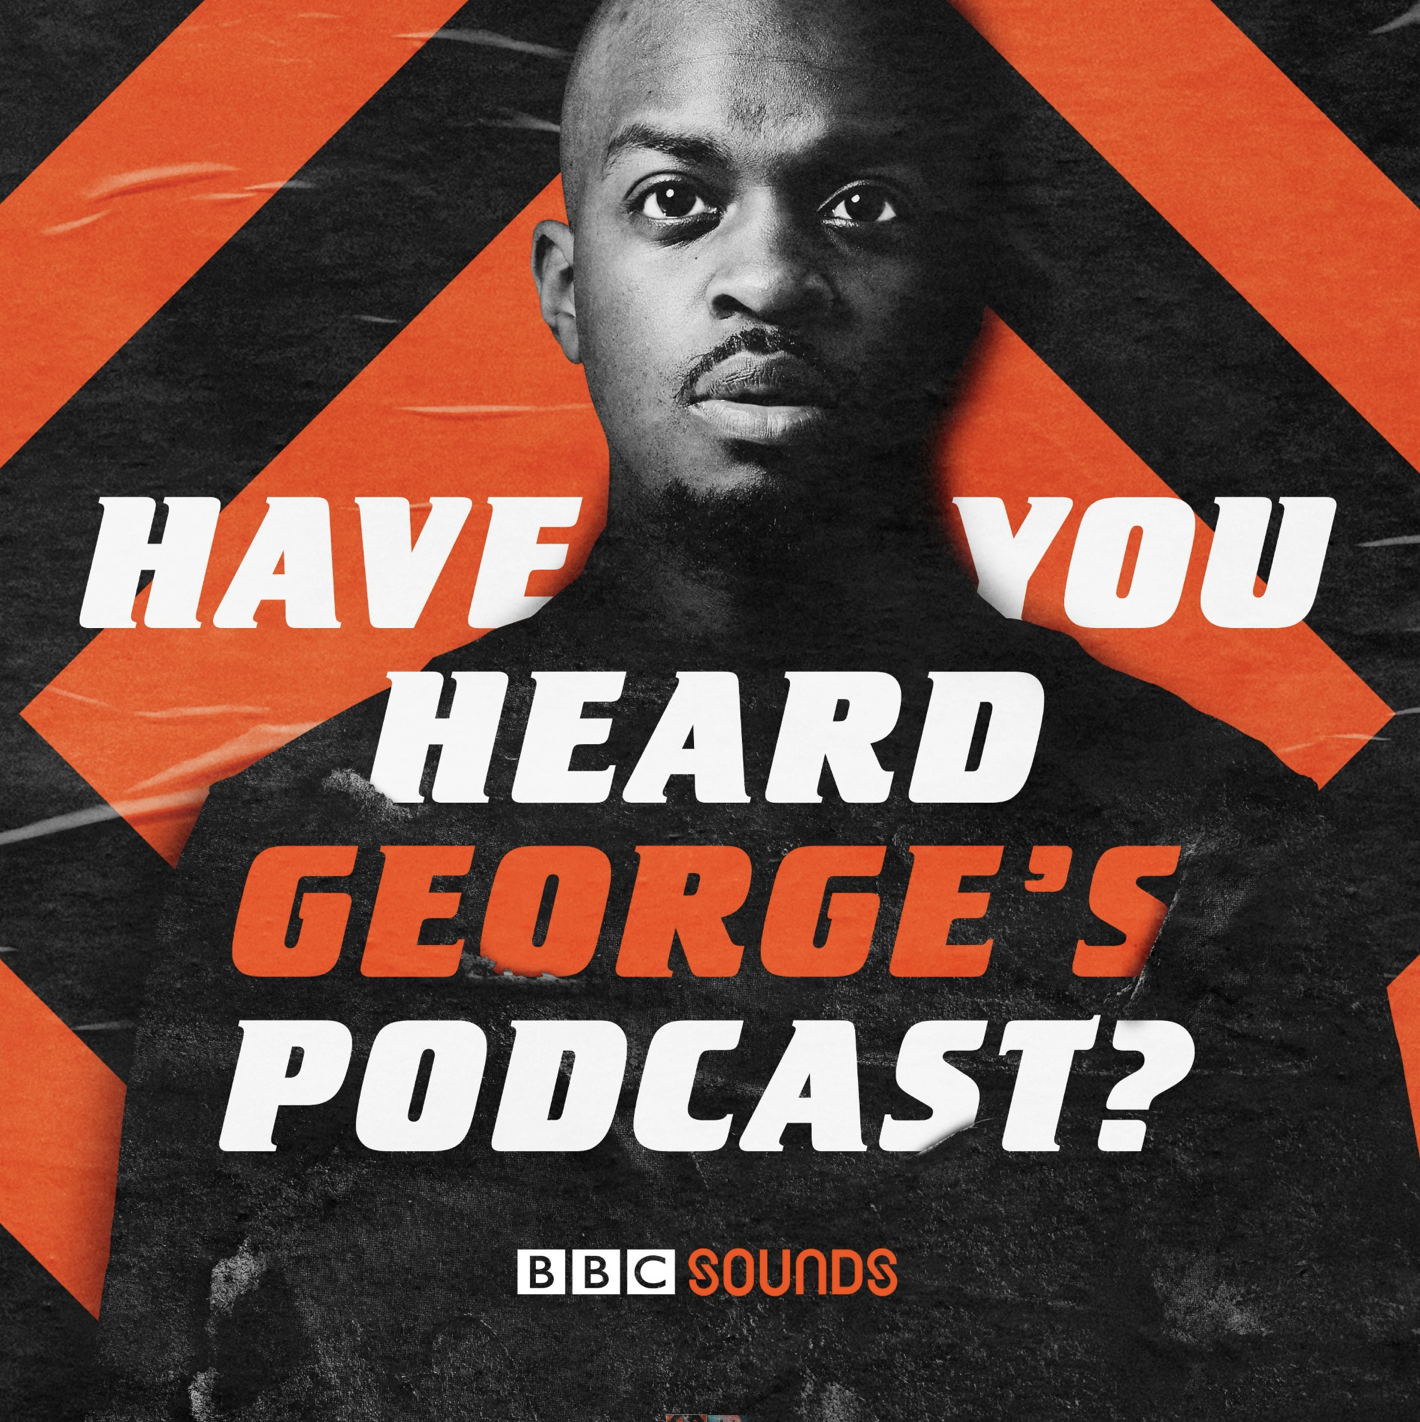 George the Poet on Colonialism, Podcasts and Premier Gaou [@Georgethepoet]